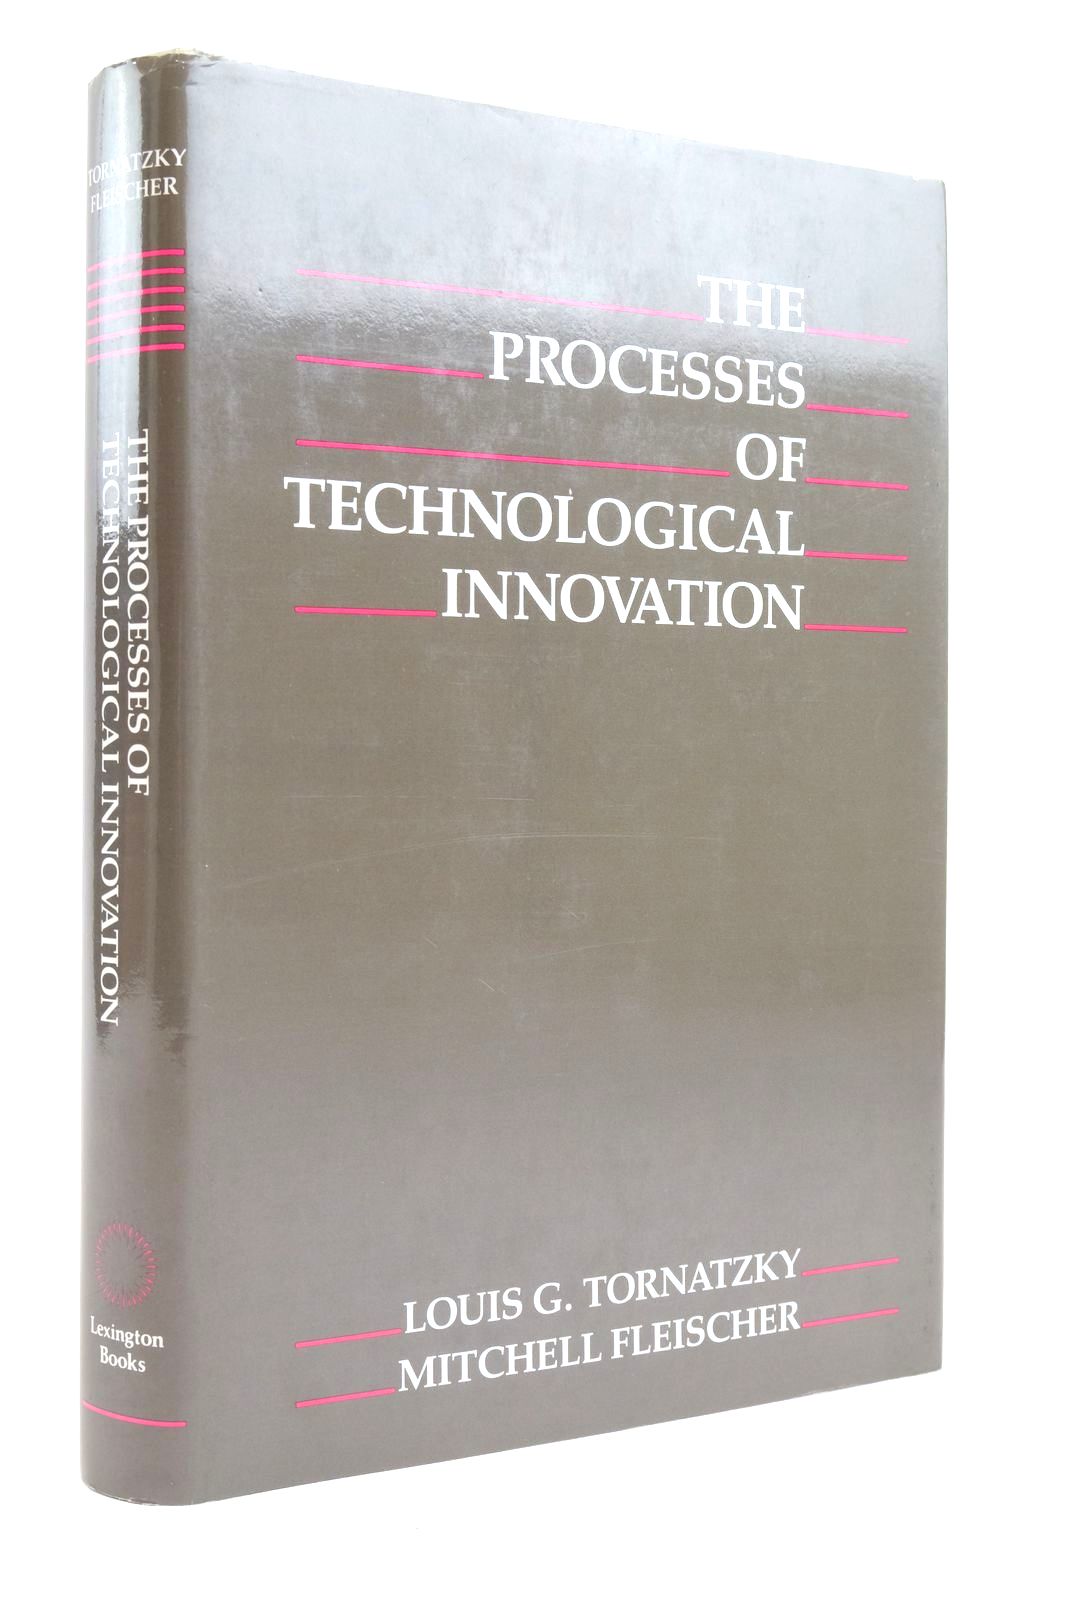 Photo of THE PROCESS OF TECHNOLOGICAL INNOVATION written by Tornatzky, Louis G. Fleischer, Mitchell et al, published by Lexington Books (STOCK CODE: 2136233)  for sale by Stella & Rose's Books